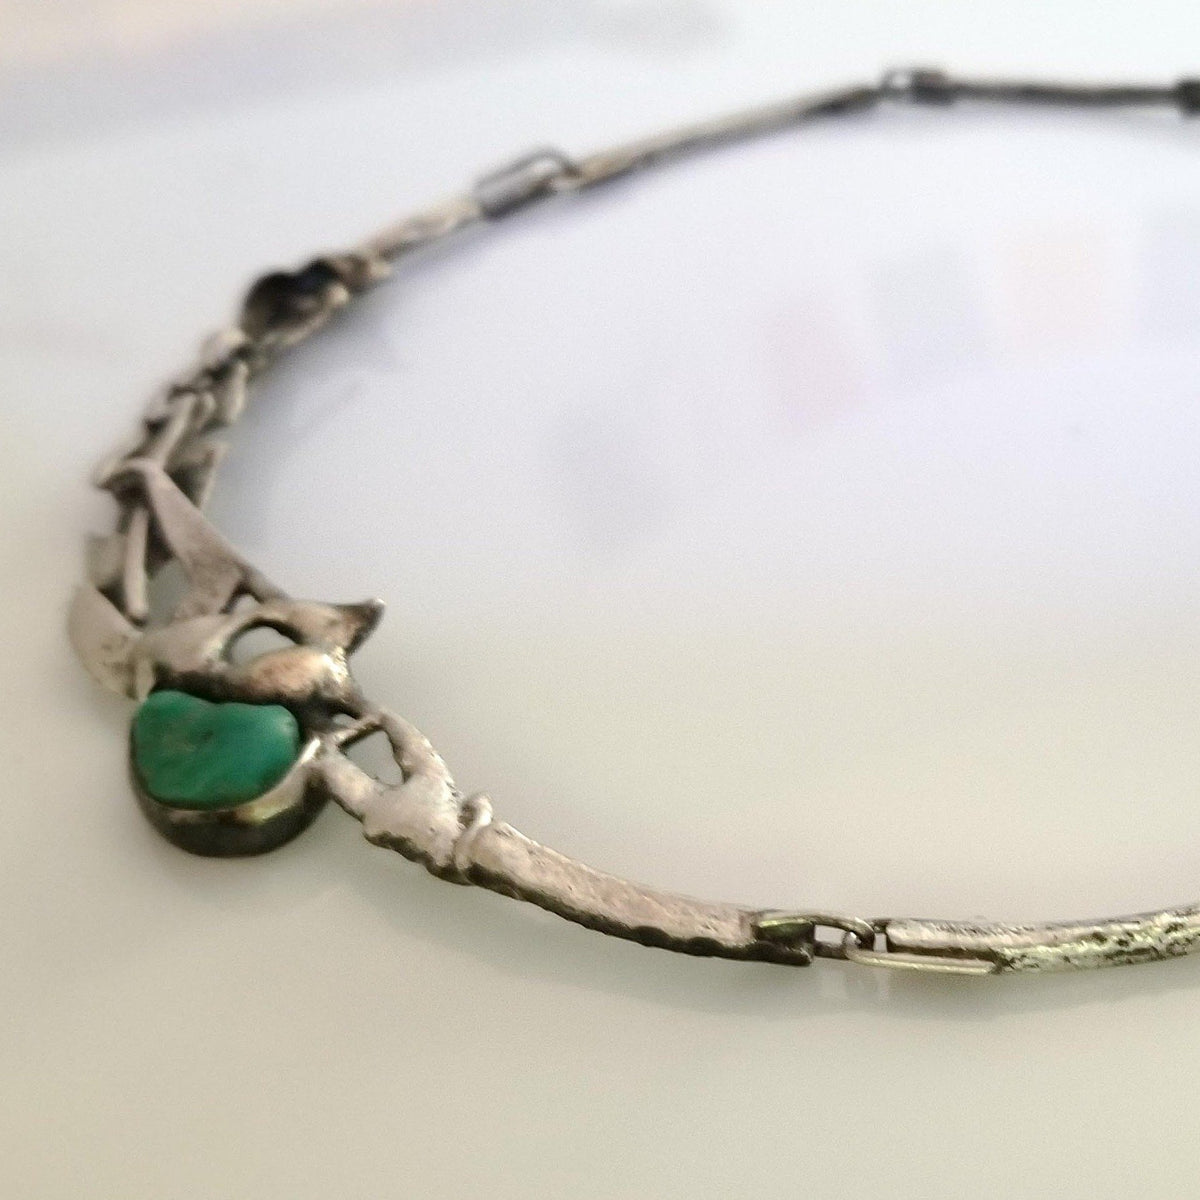 Green turquoise and silver choker